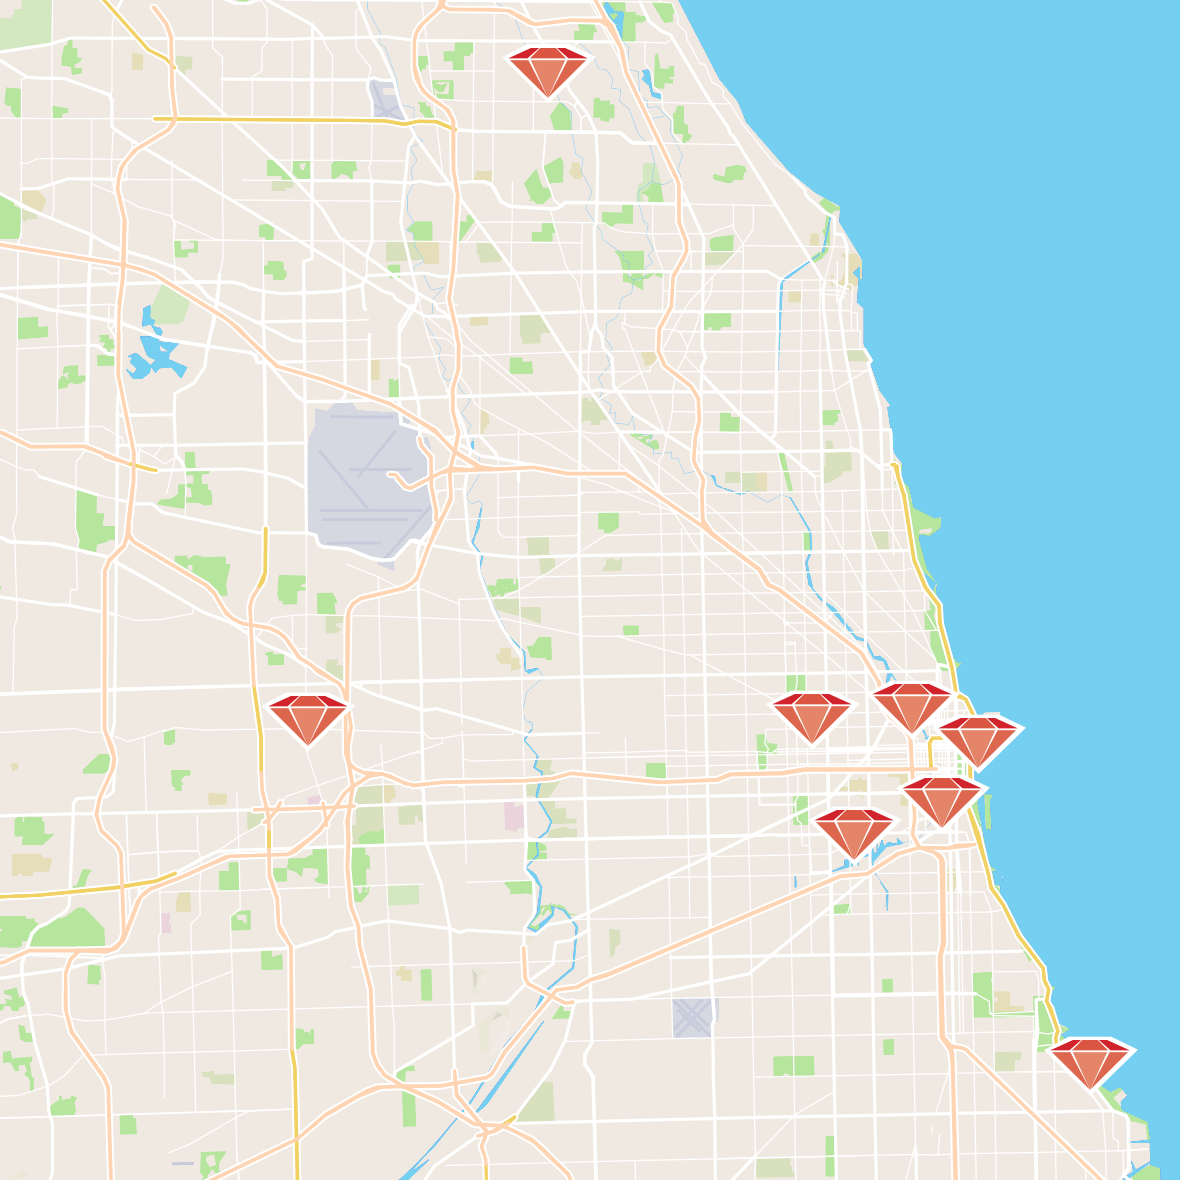 Map of ChicagoRuby locations throughout the Chicagoland area